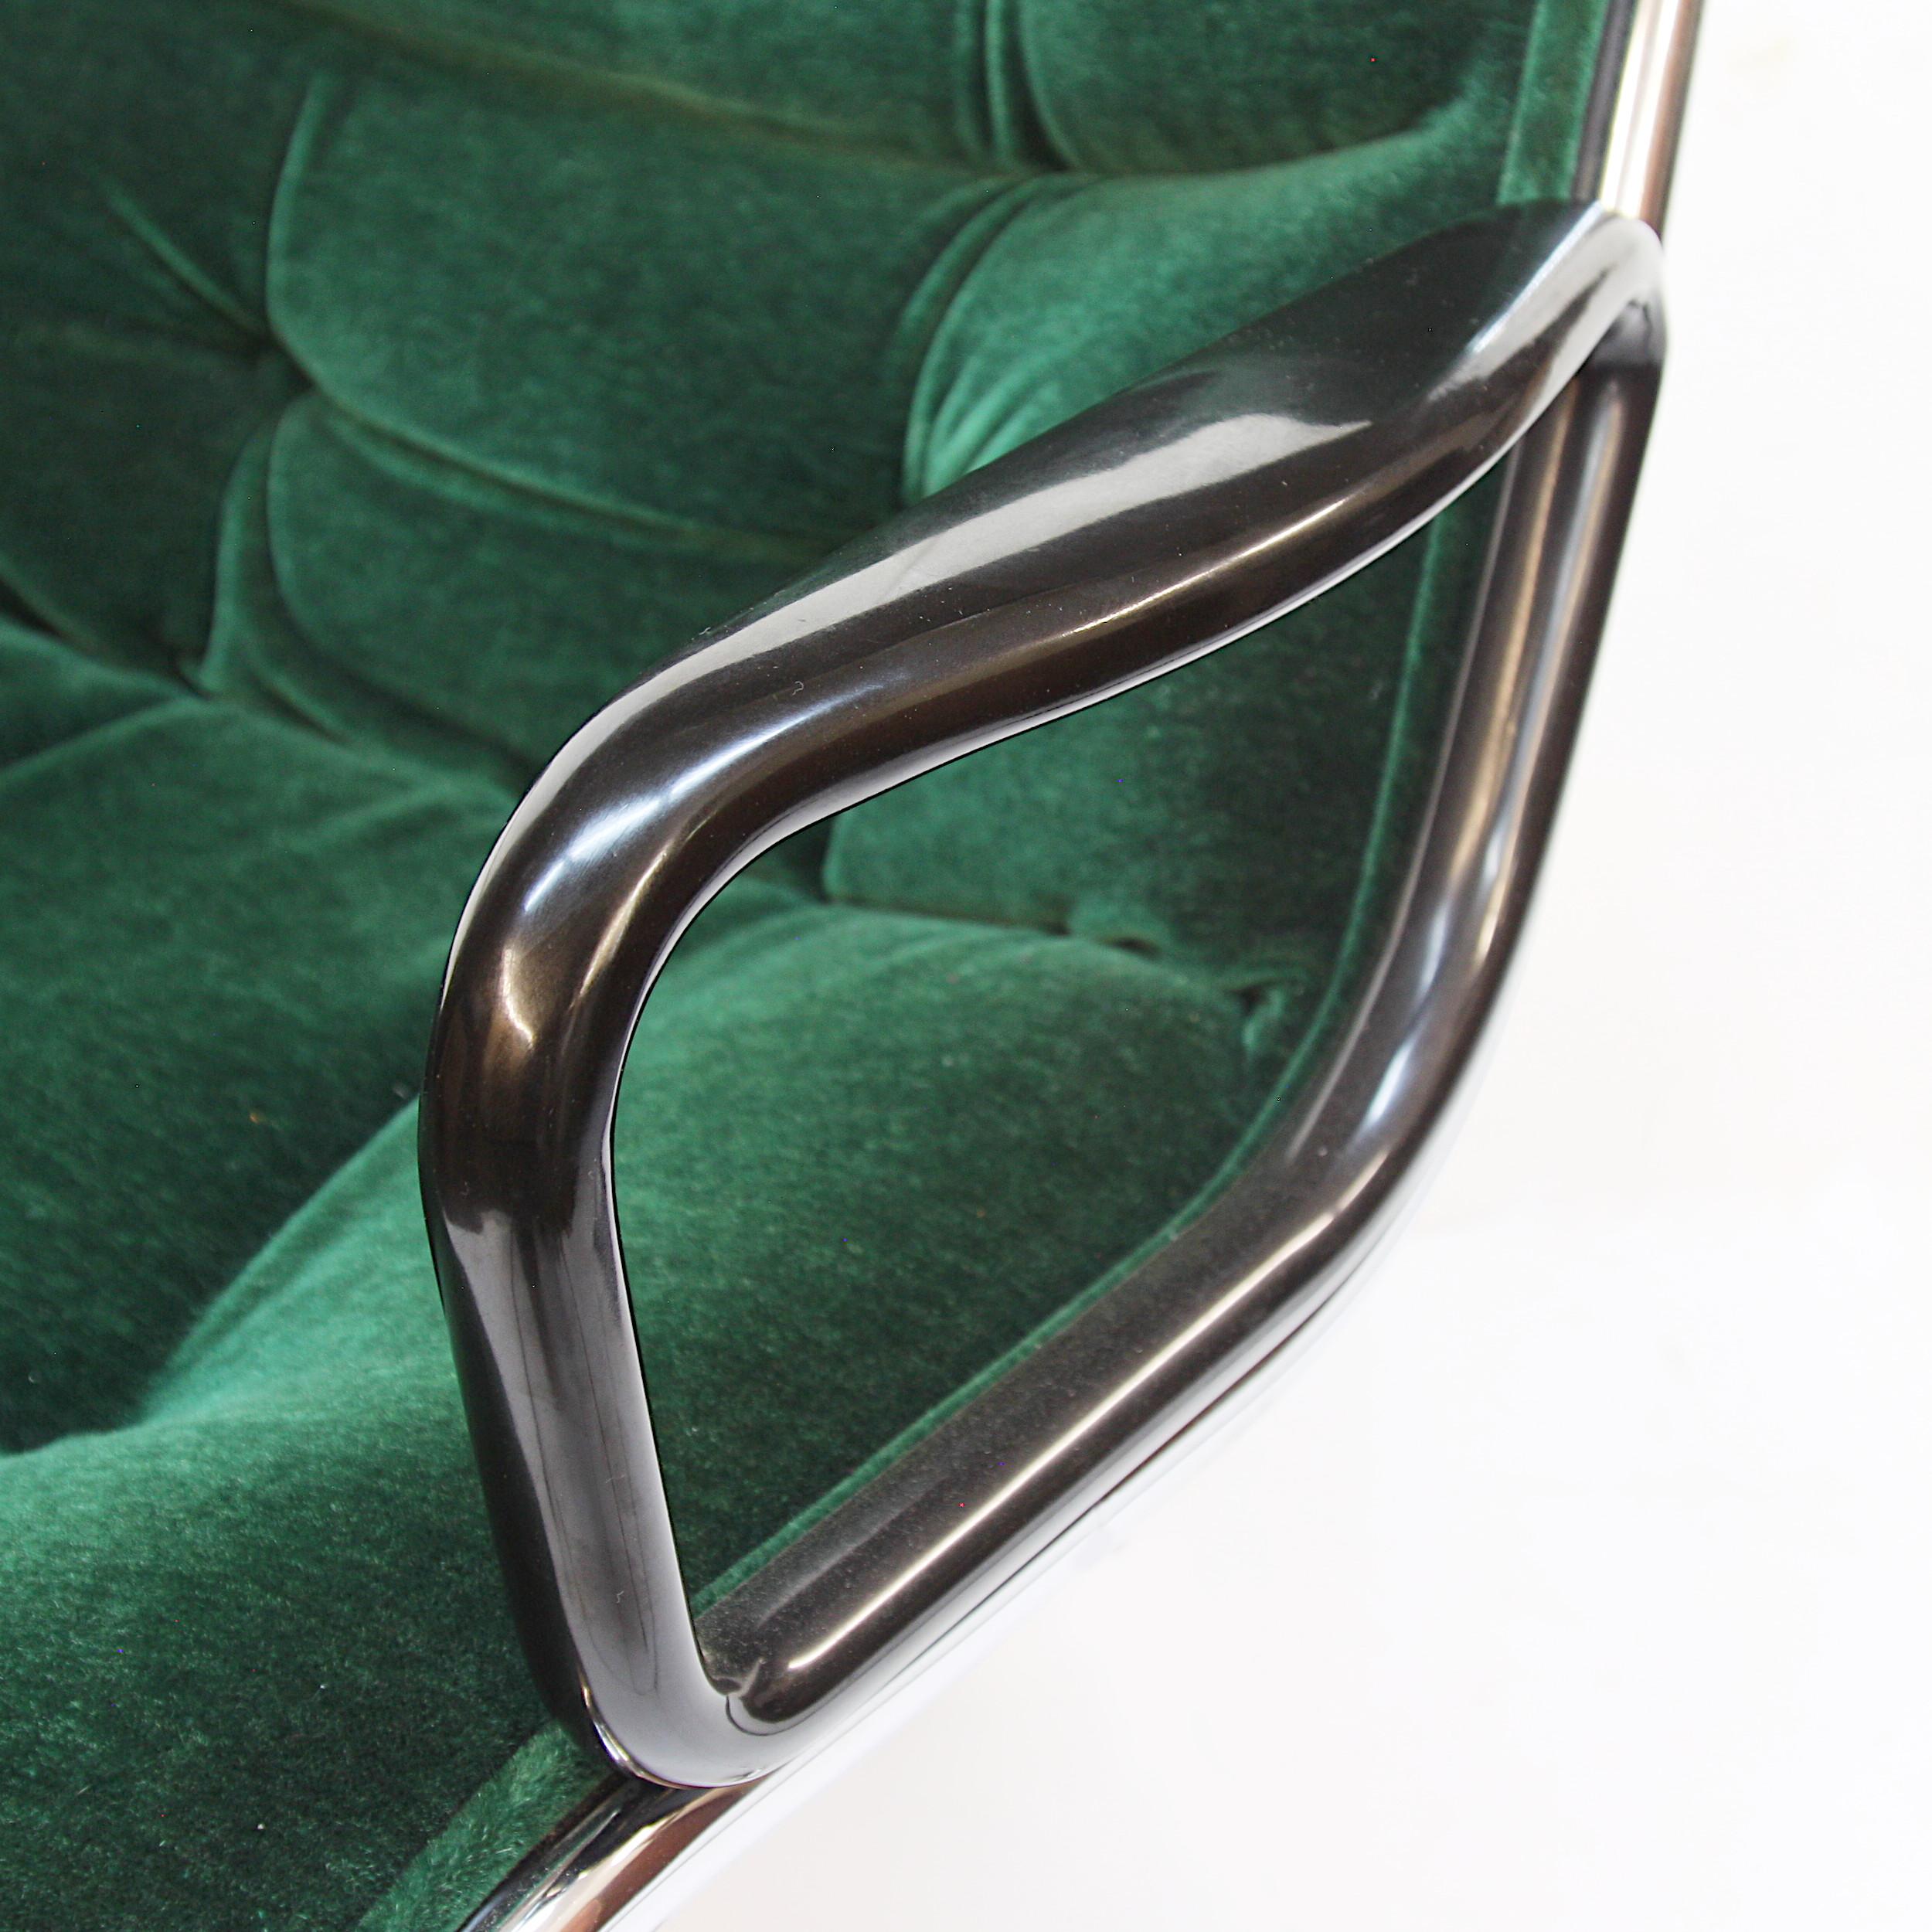 Late 20th Century Mid-Century Modern Green Velour Desk Chair by Charles Pollock for Knoll Studios